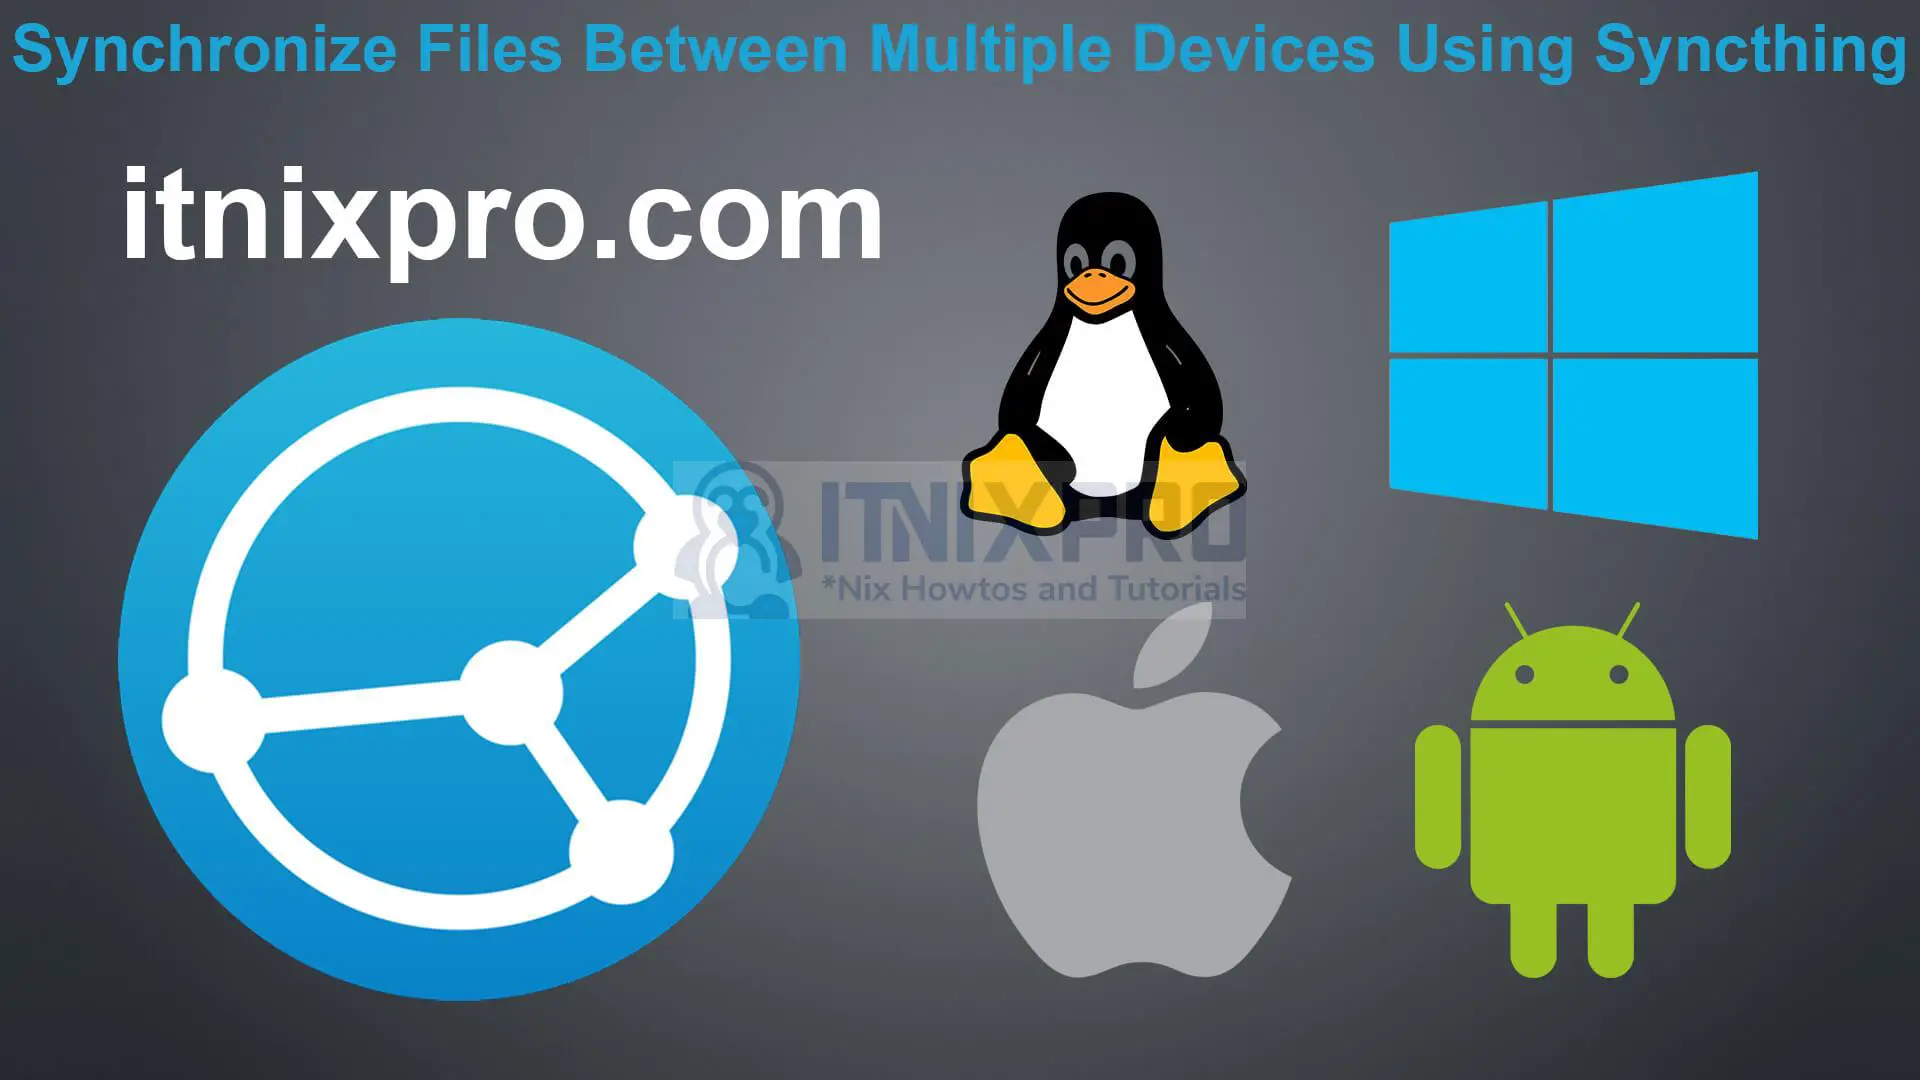 Synchronize Files between multiple devices using Syncthing